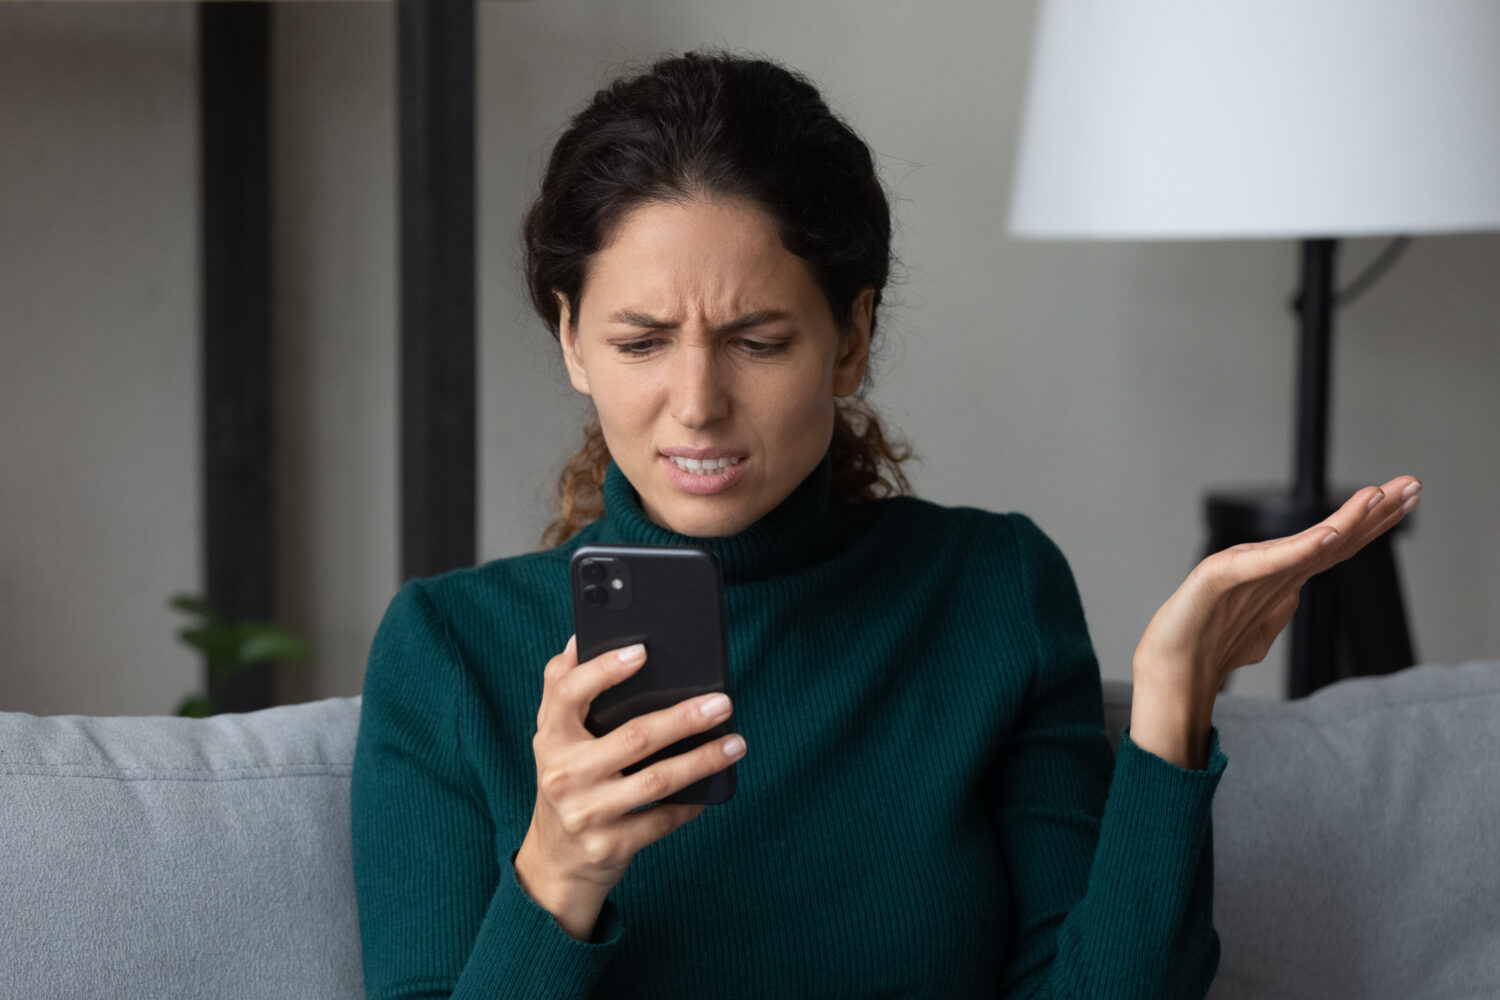 Close up angry dissatisfied woman looking at phone screen